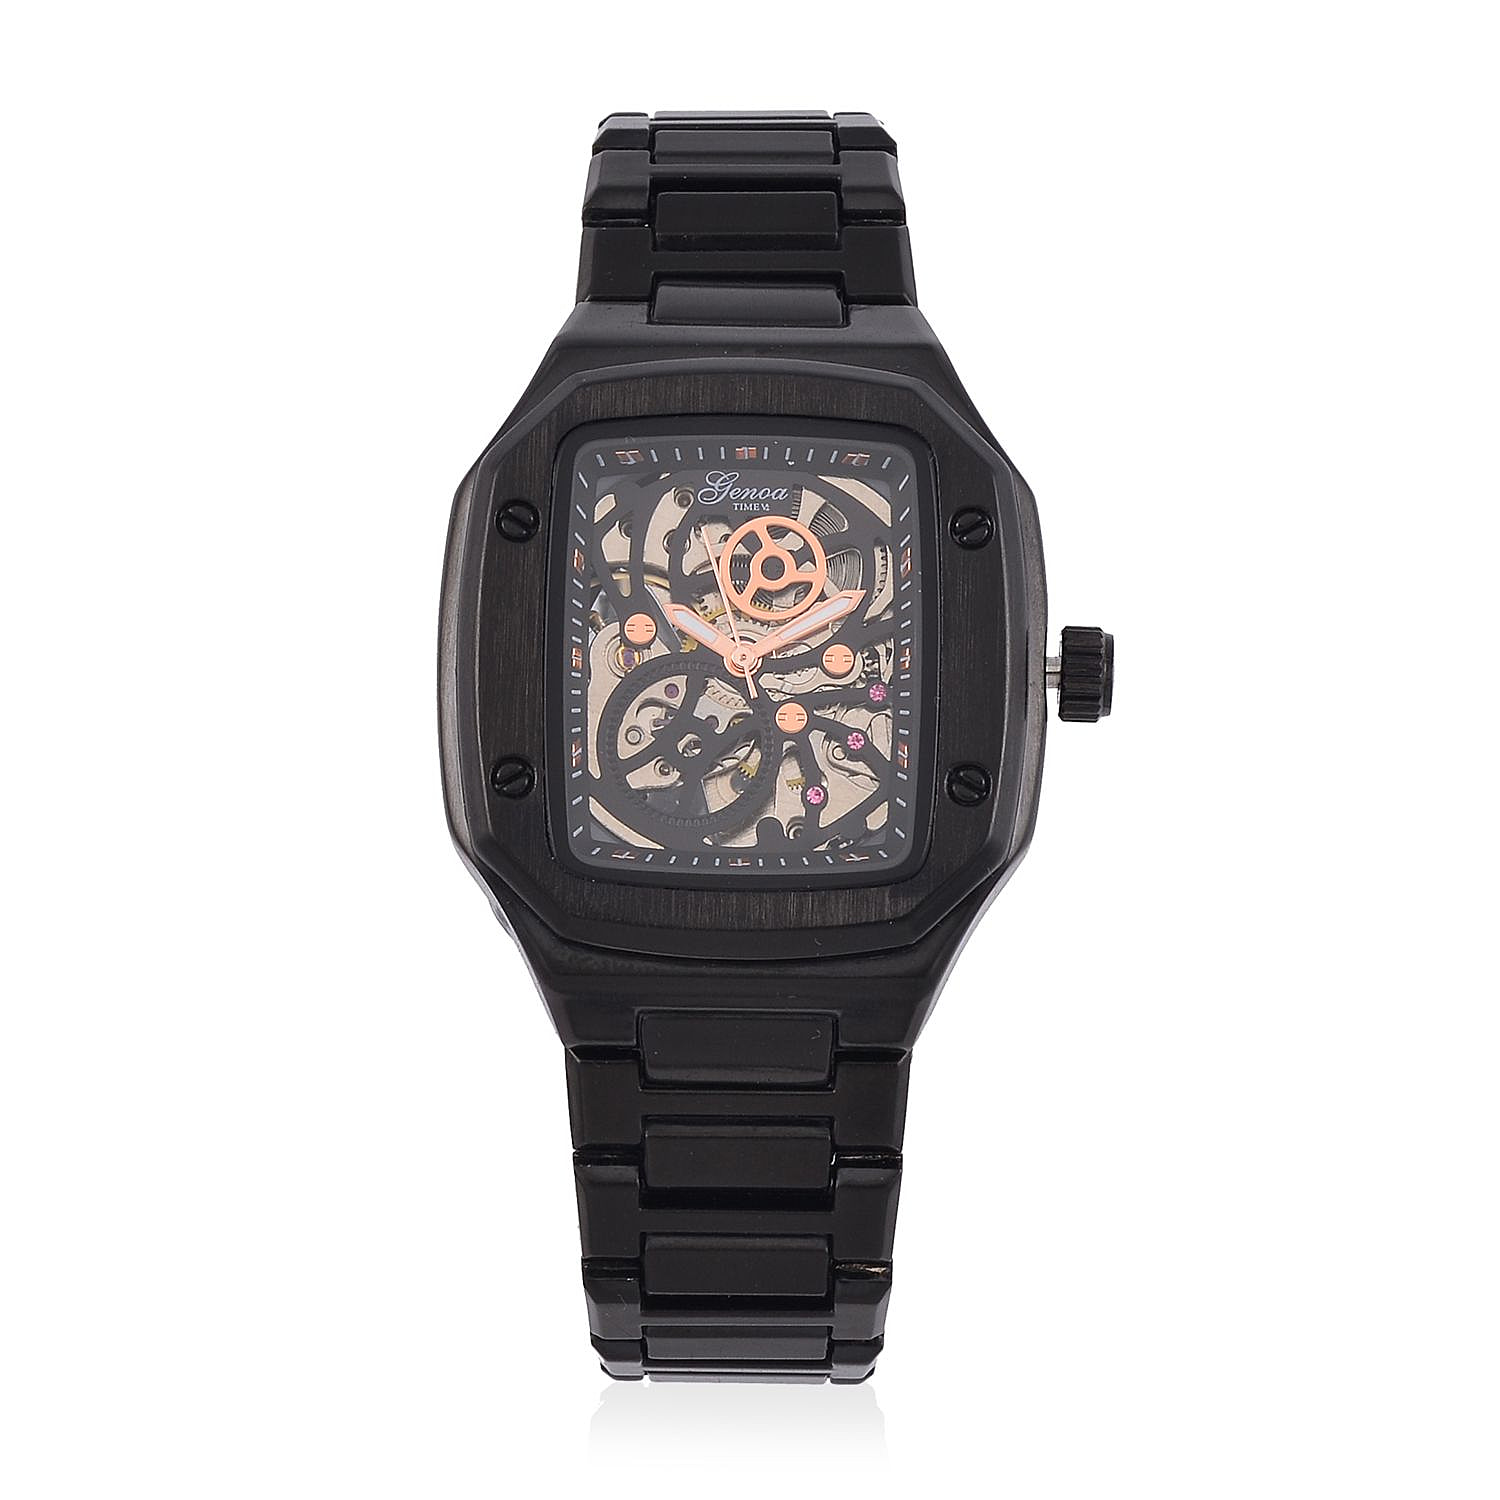 Limited Edition - GENOA Time V2 Automatic Skeleton Watch in Black